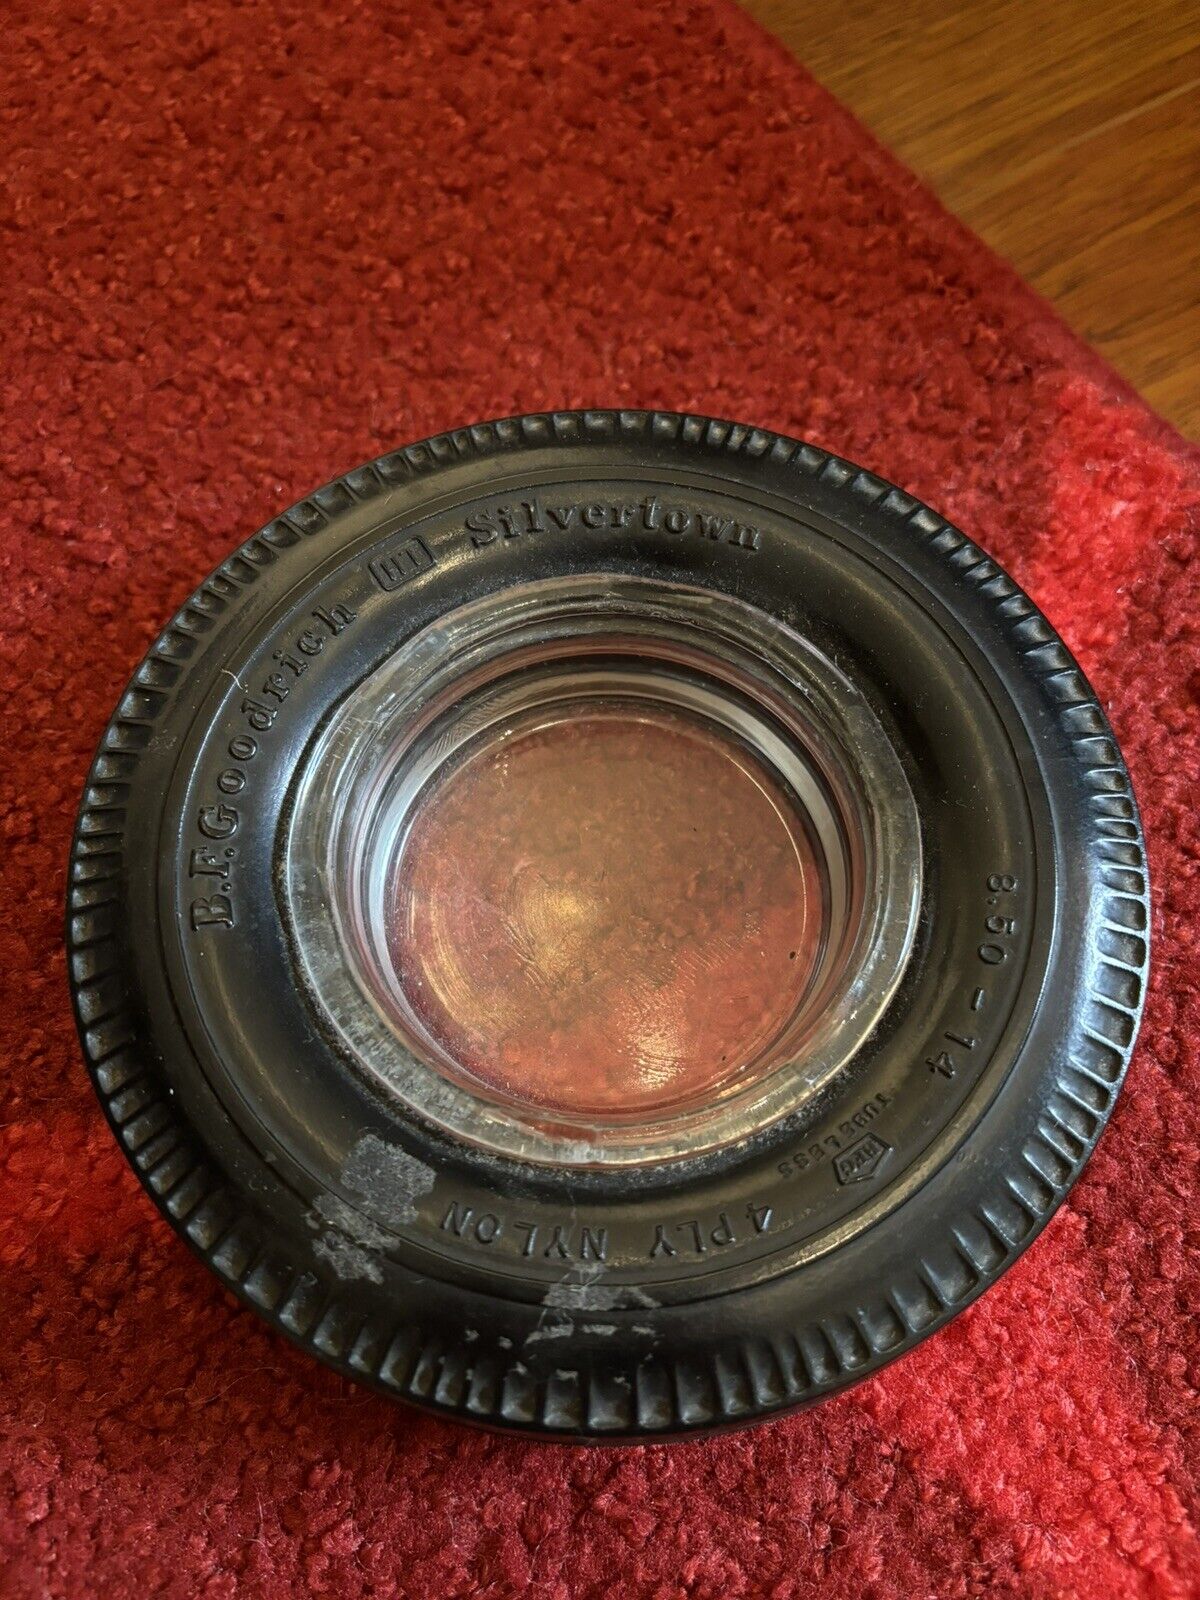 Vintage B.F. Goodrich Silvertown 4 Ply Tire Ashtray with glass insert